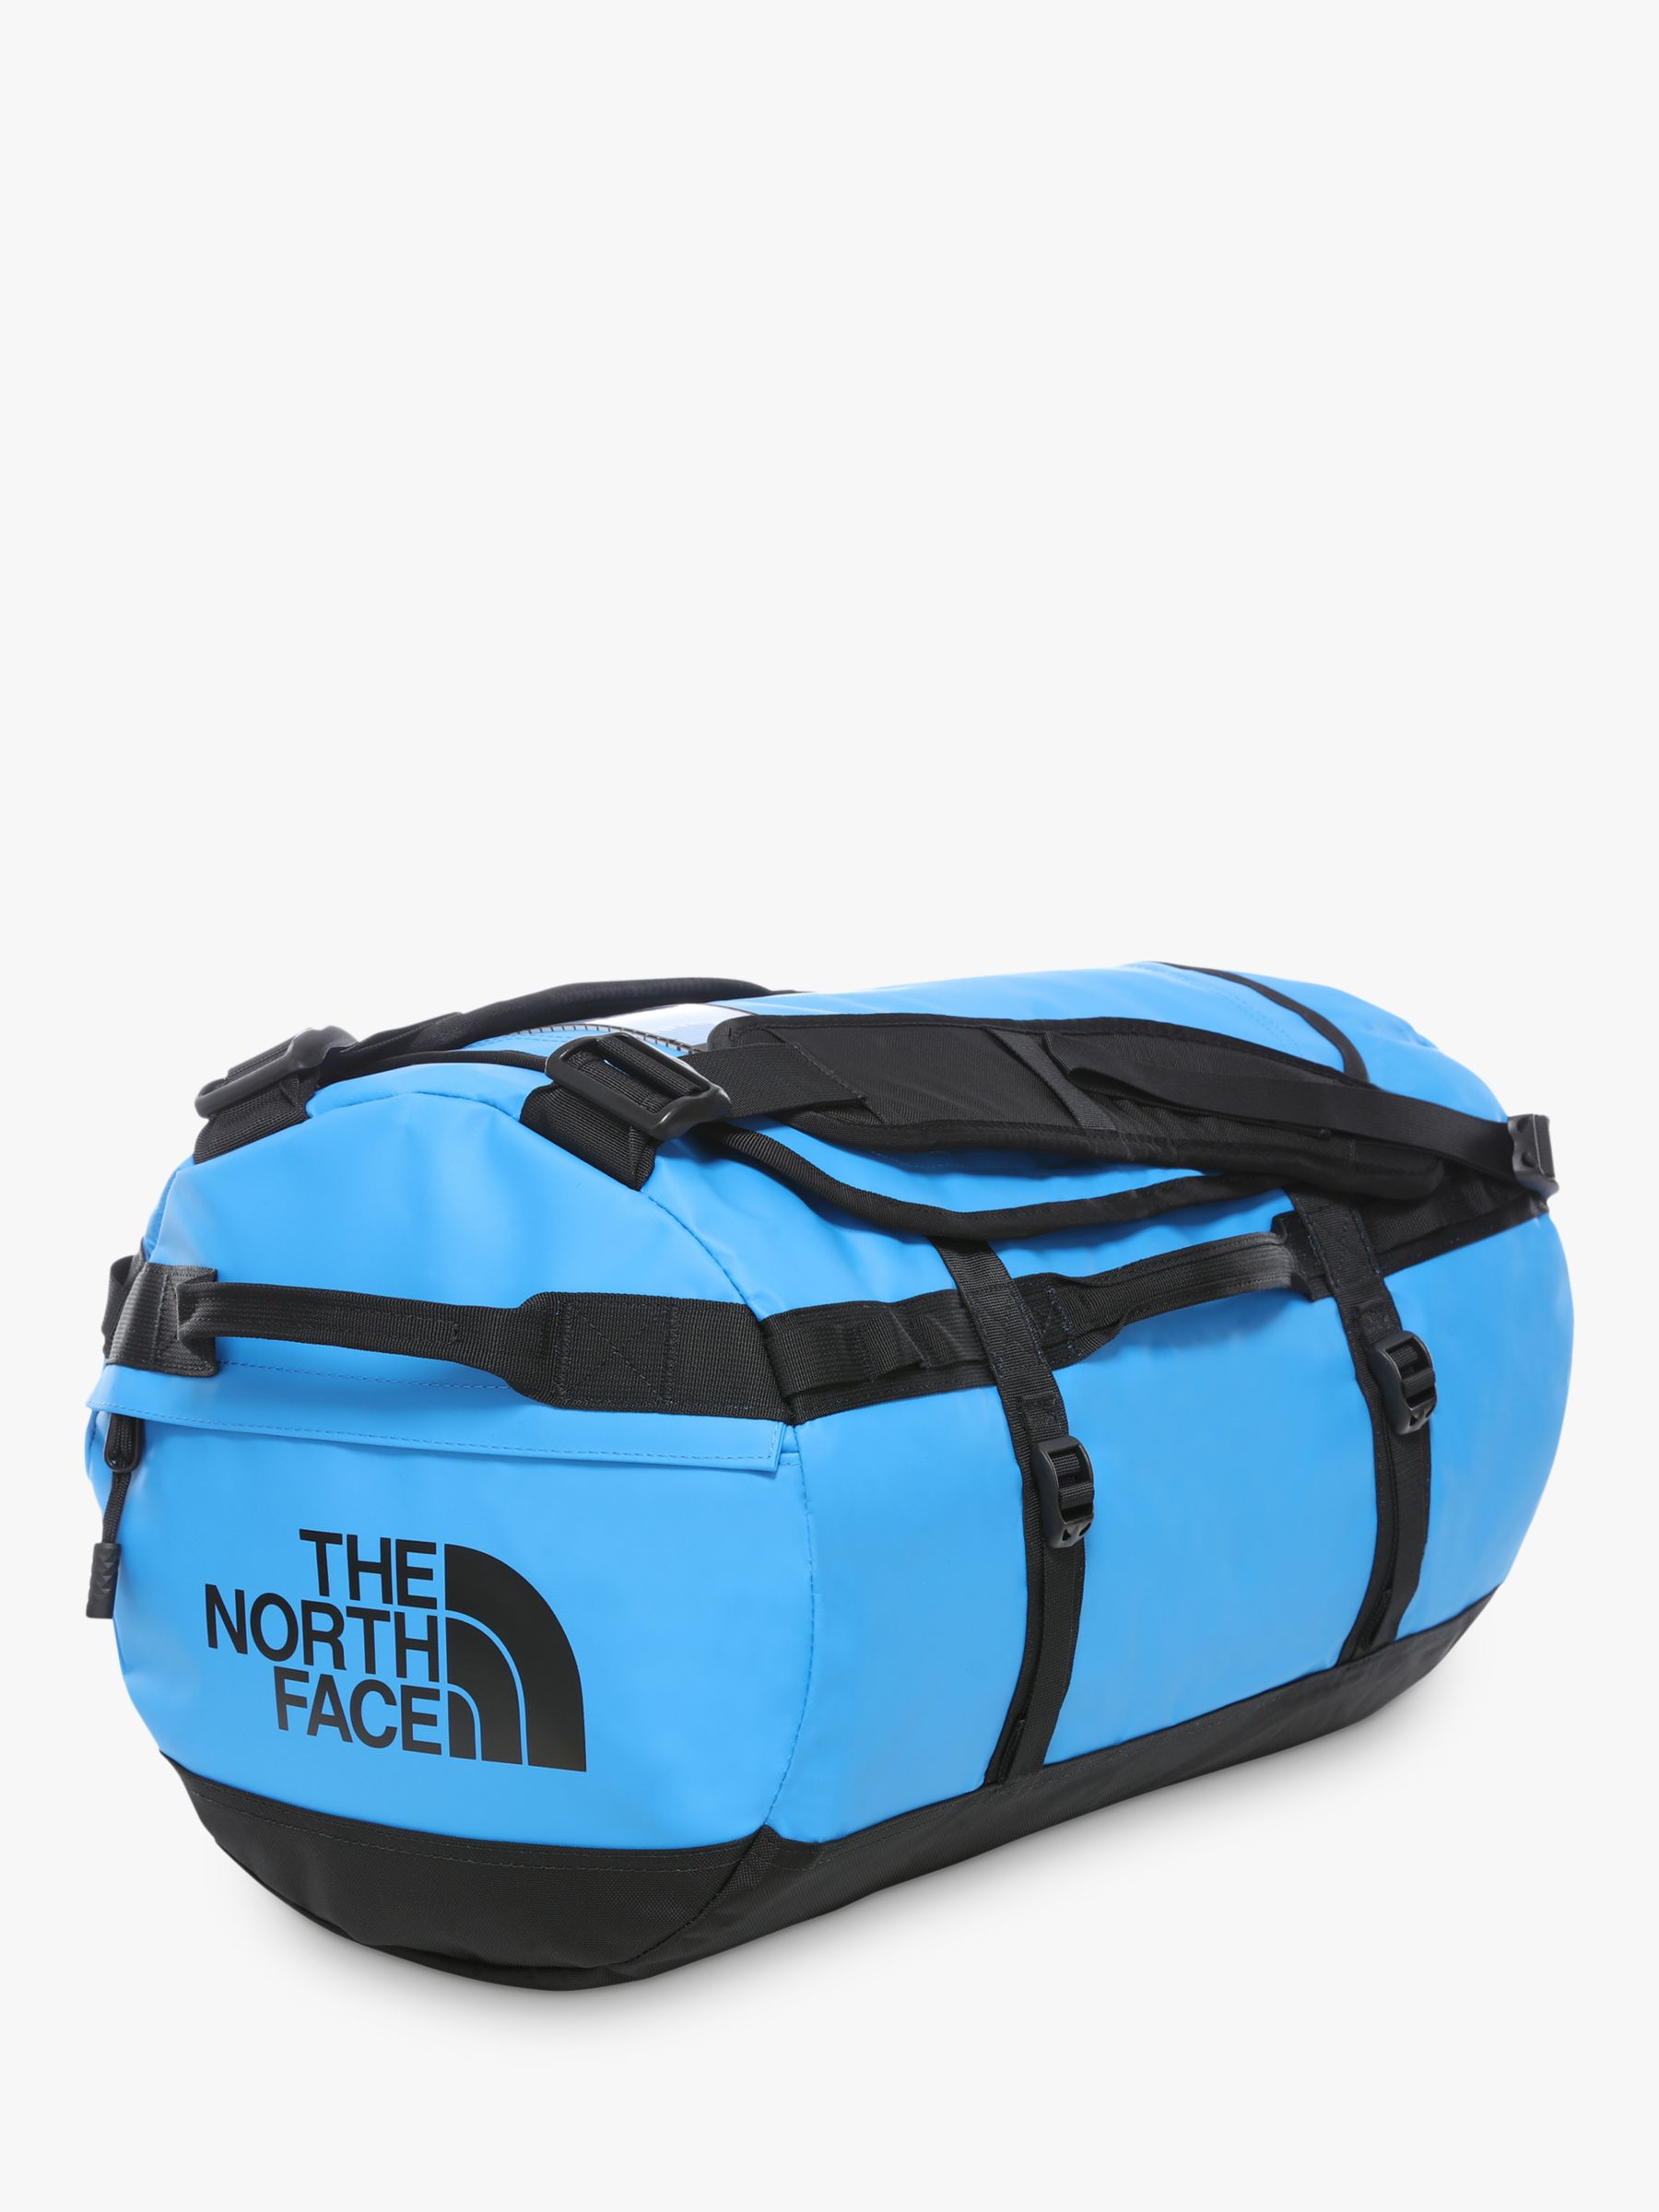 The North Face Sports Bag Sale John Lewis Partners